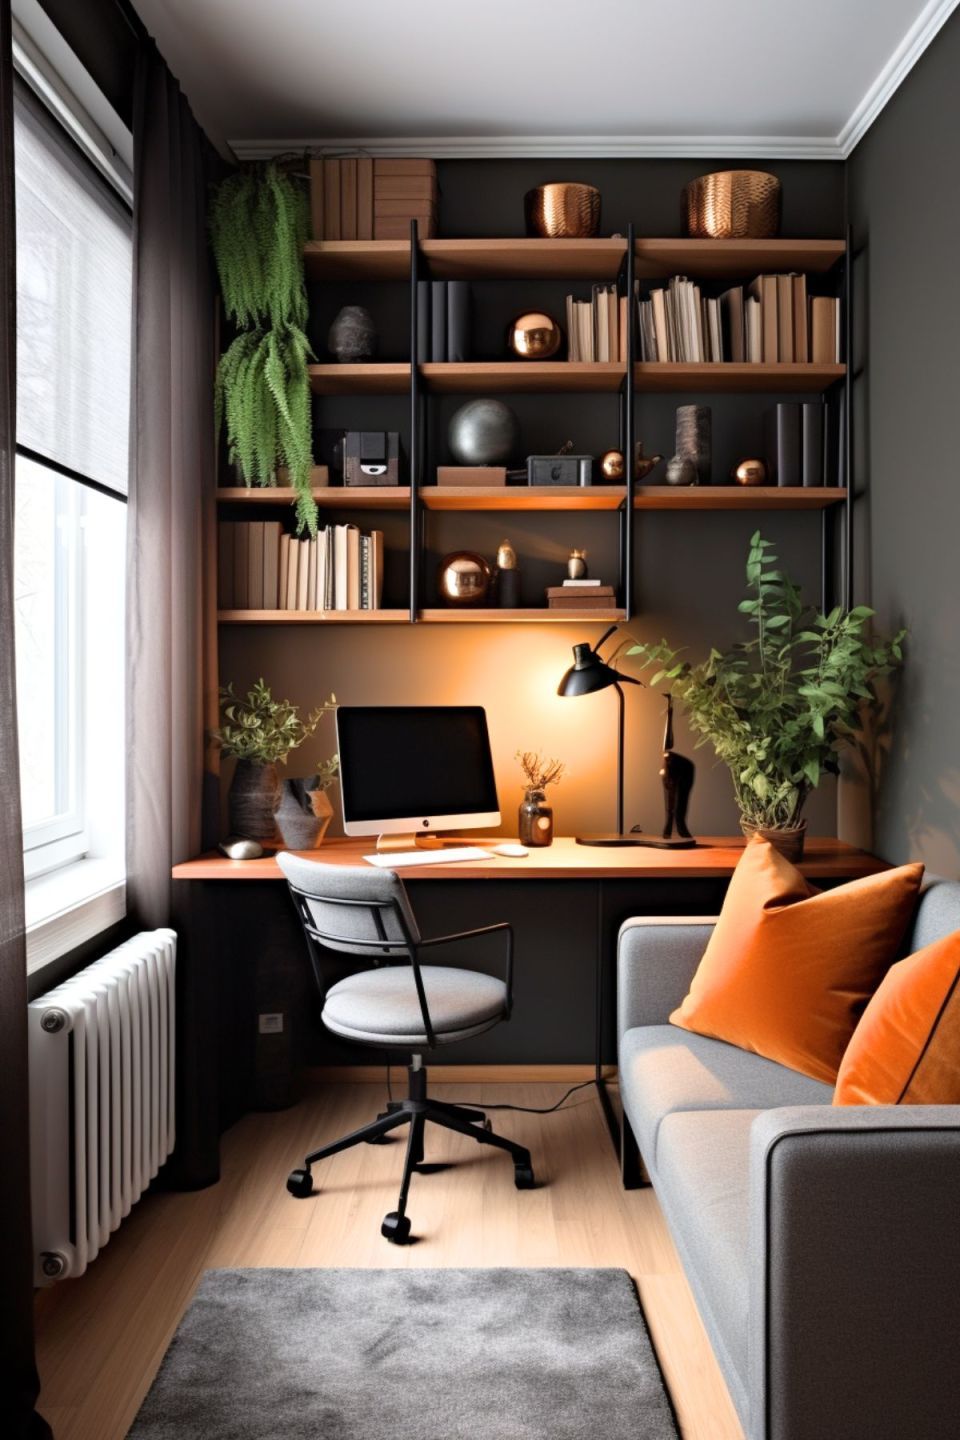 Home Office Room : Creating a Productive Home Office Space without Breaking the Bank